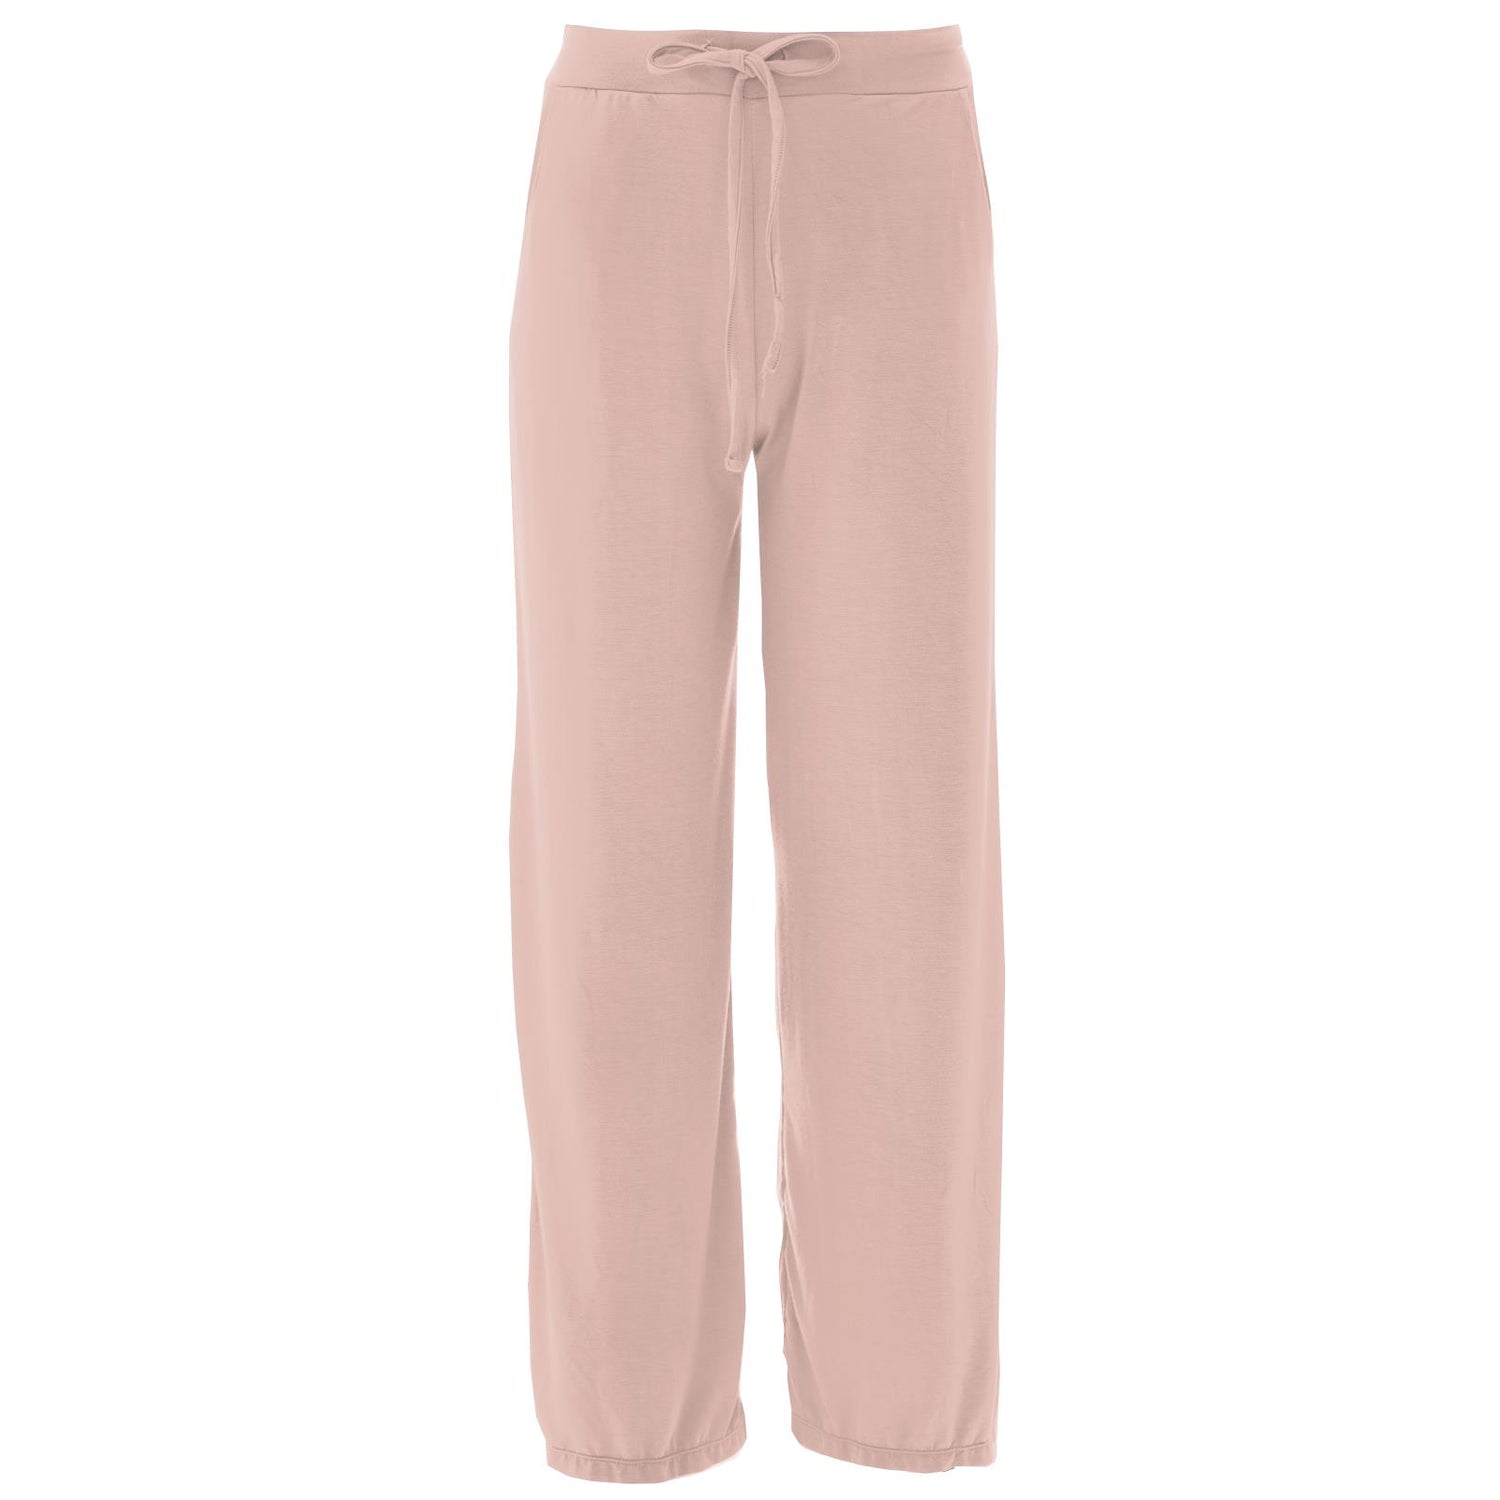 Women's Solid Lounge Pants in Peach Blossom